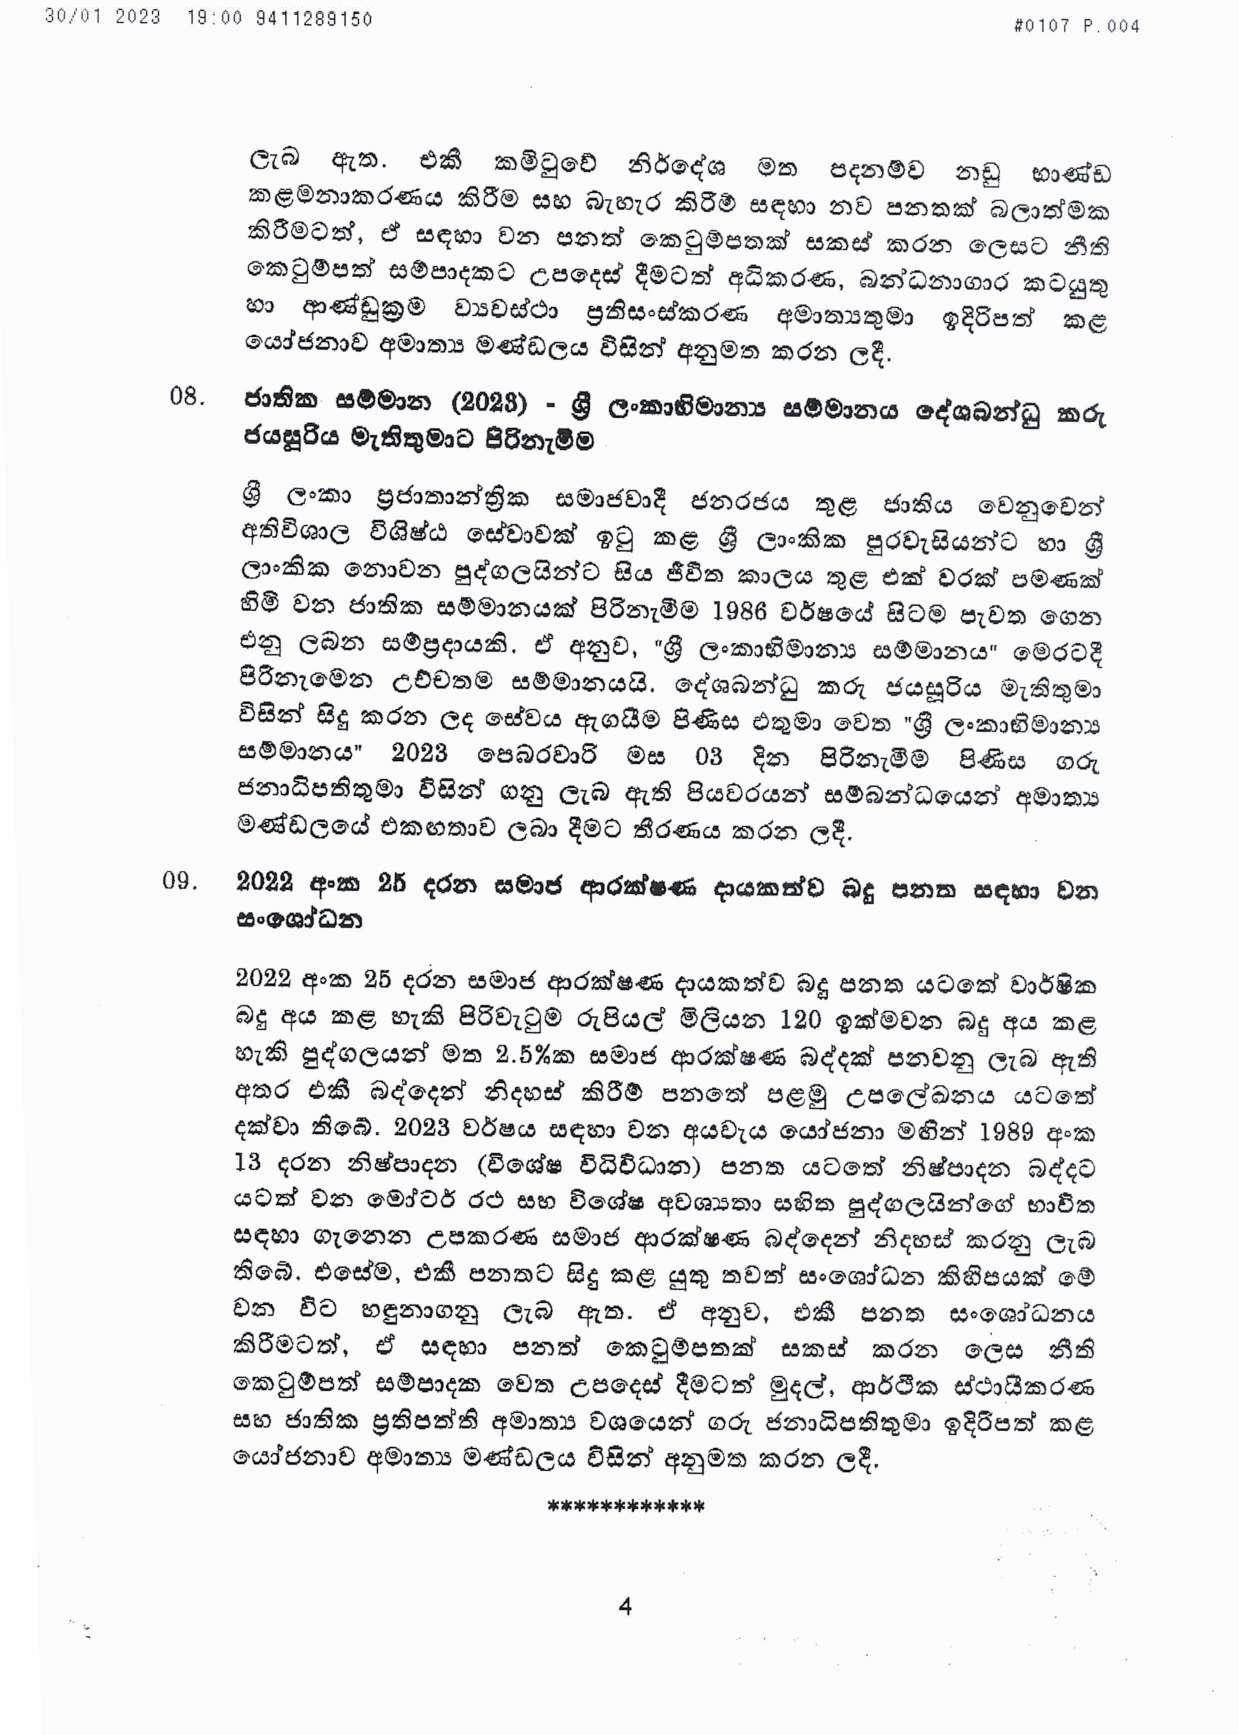 Cabinet Decisions on 30.01.2023 page 004